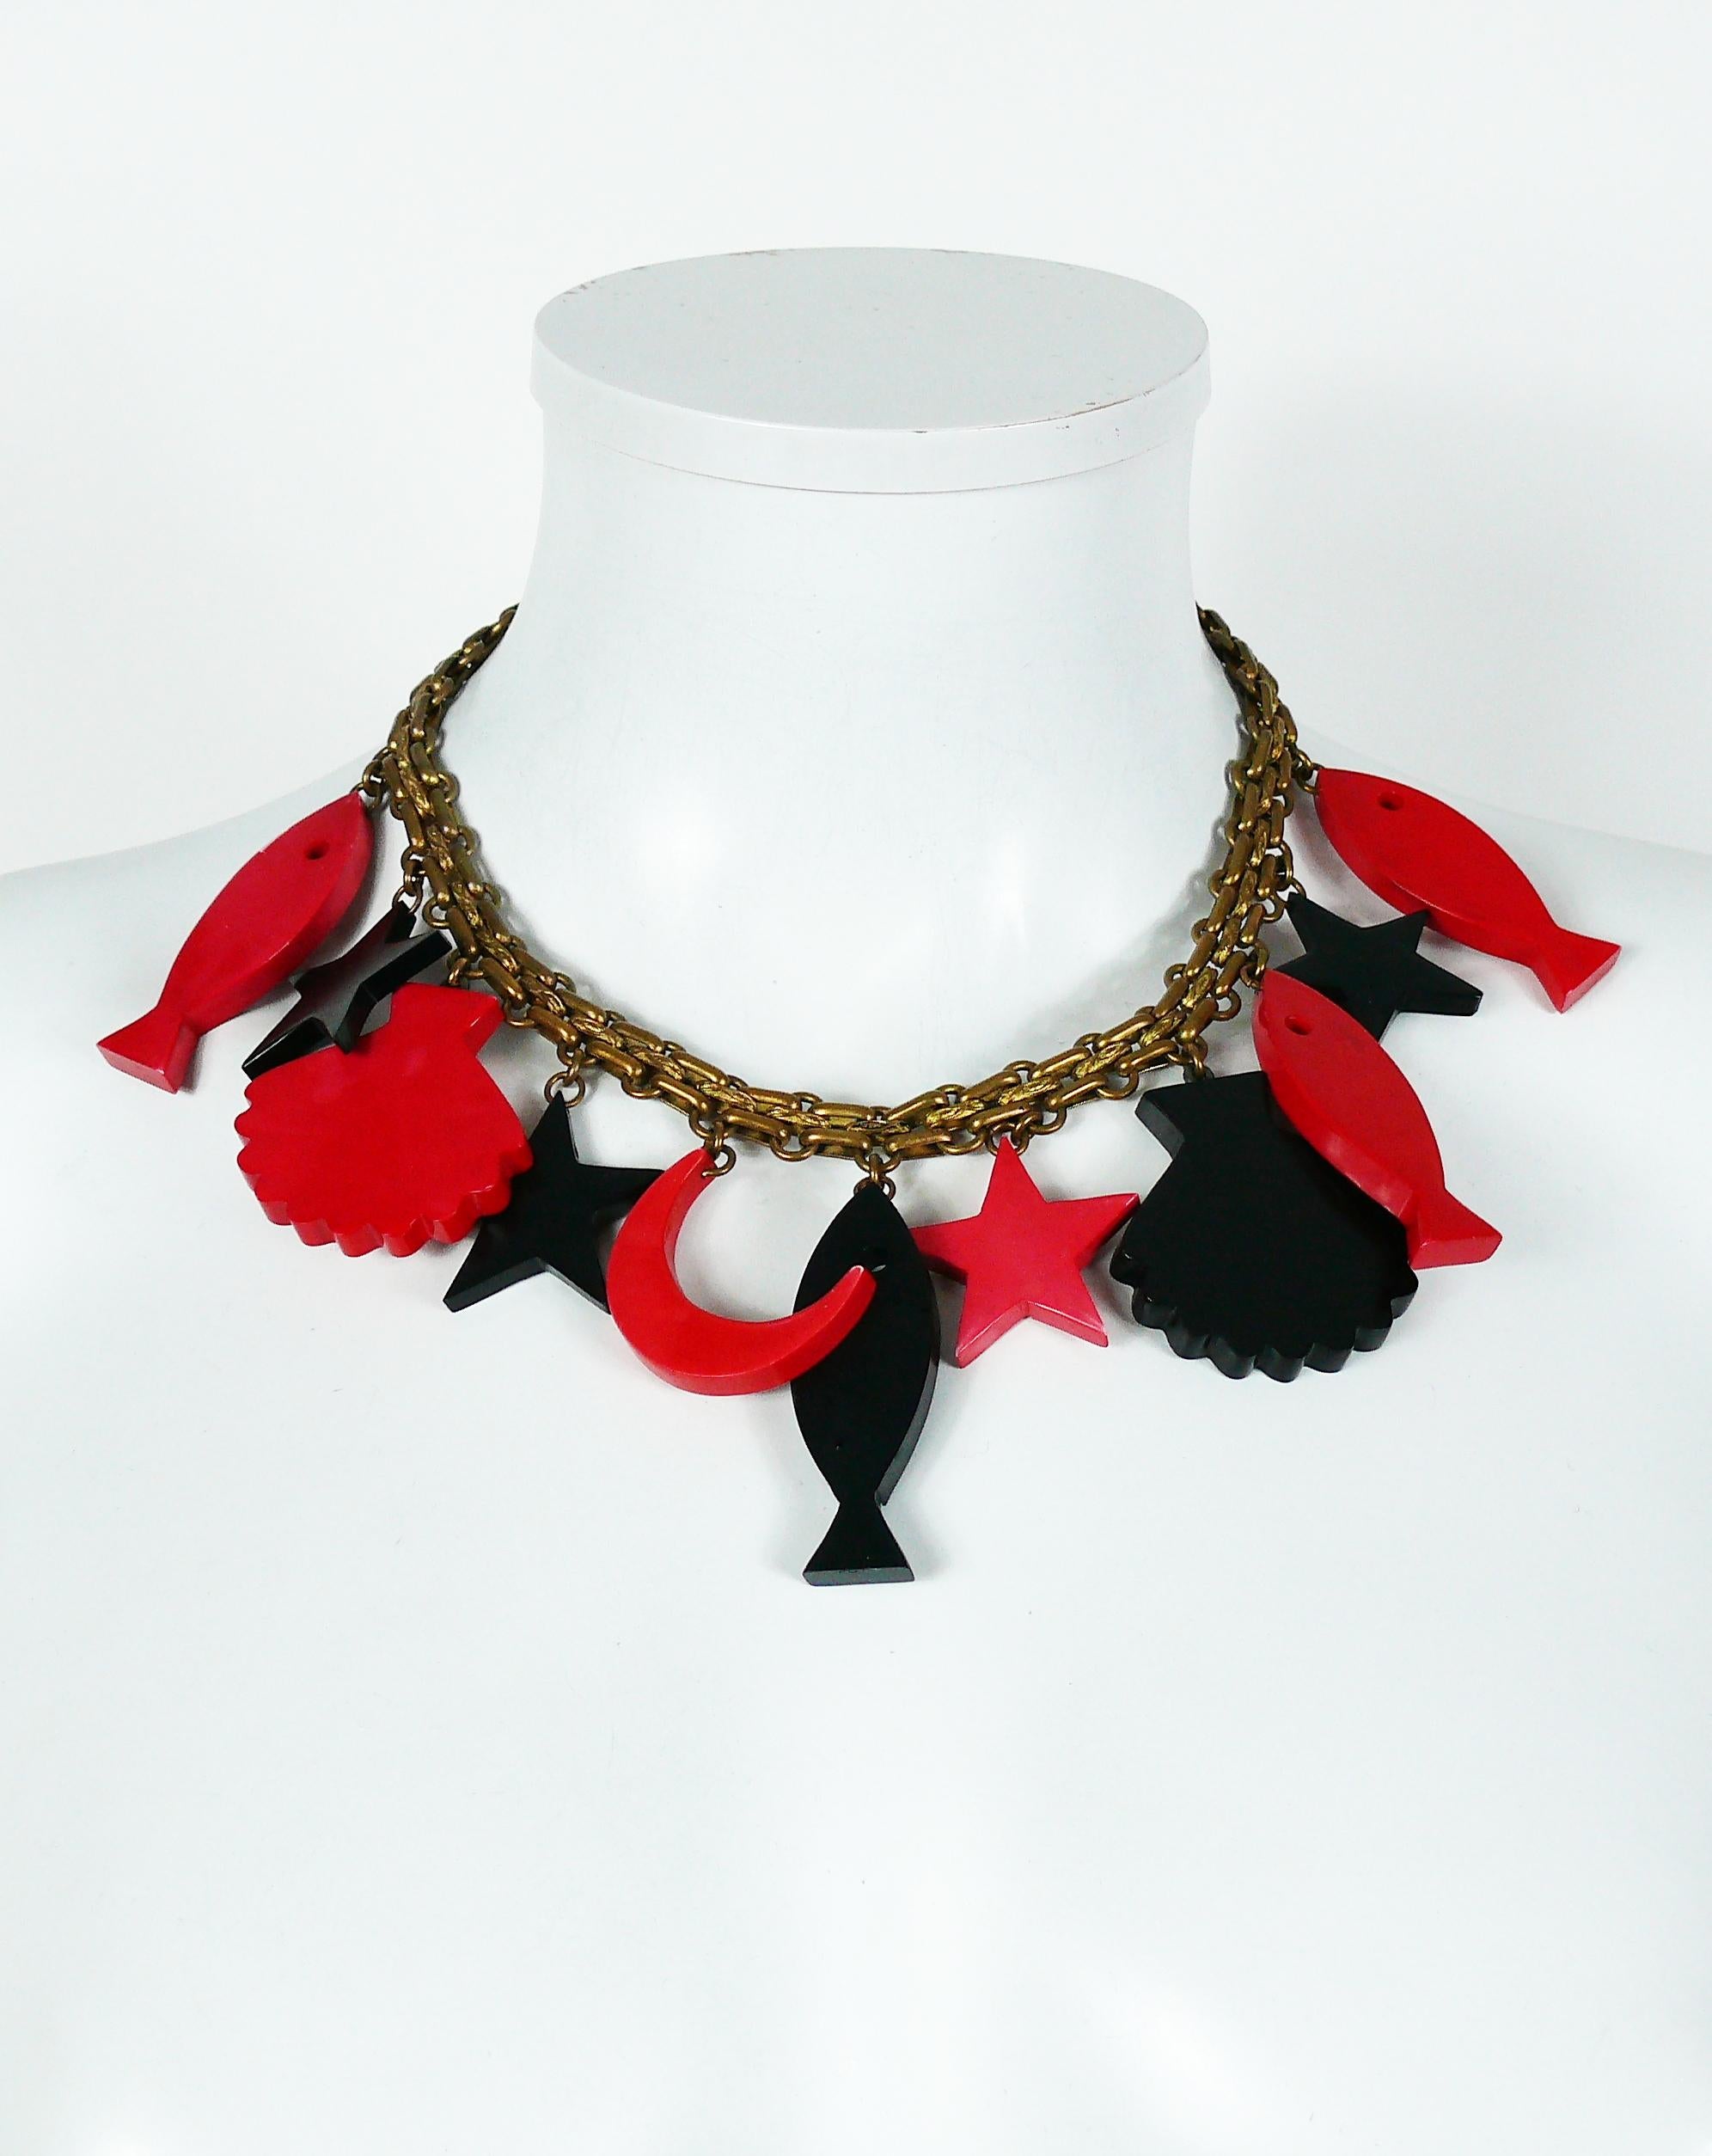 YVES SAINT LAURENT vintage rare bronze toned chain necklace featuring black and red charms : fishes, stars, shells, crescent moon.

Hook closure.

Embossed YSL.

Indicative measurements : length approx. 43 cm (16.93 inches).

JEWELRY CONDITION